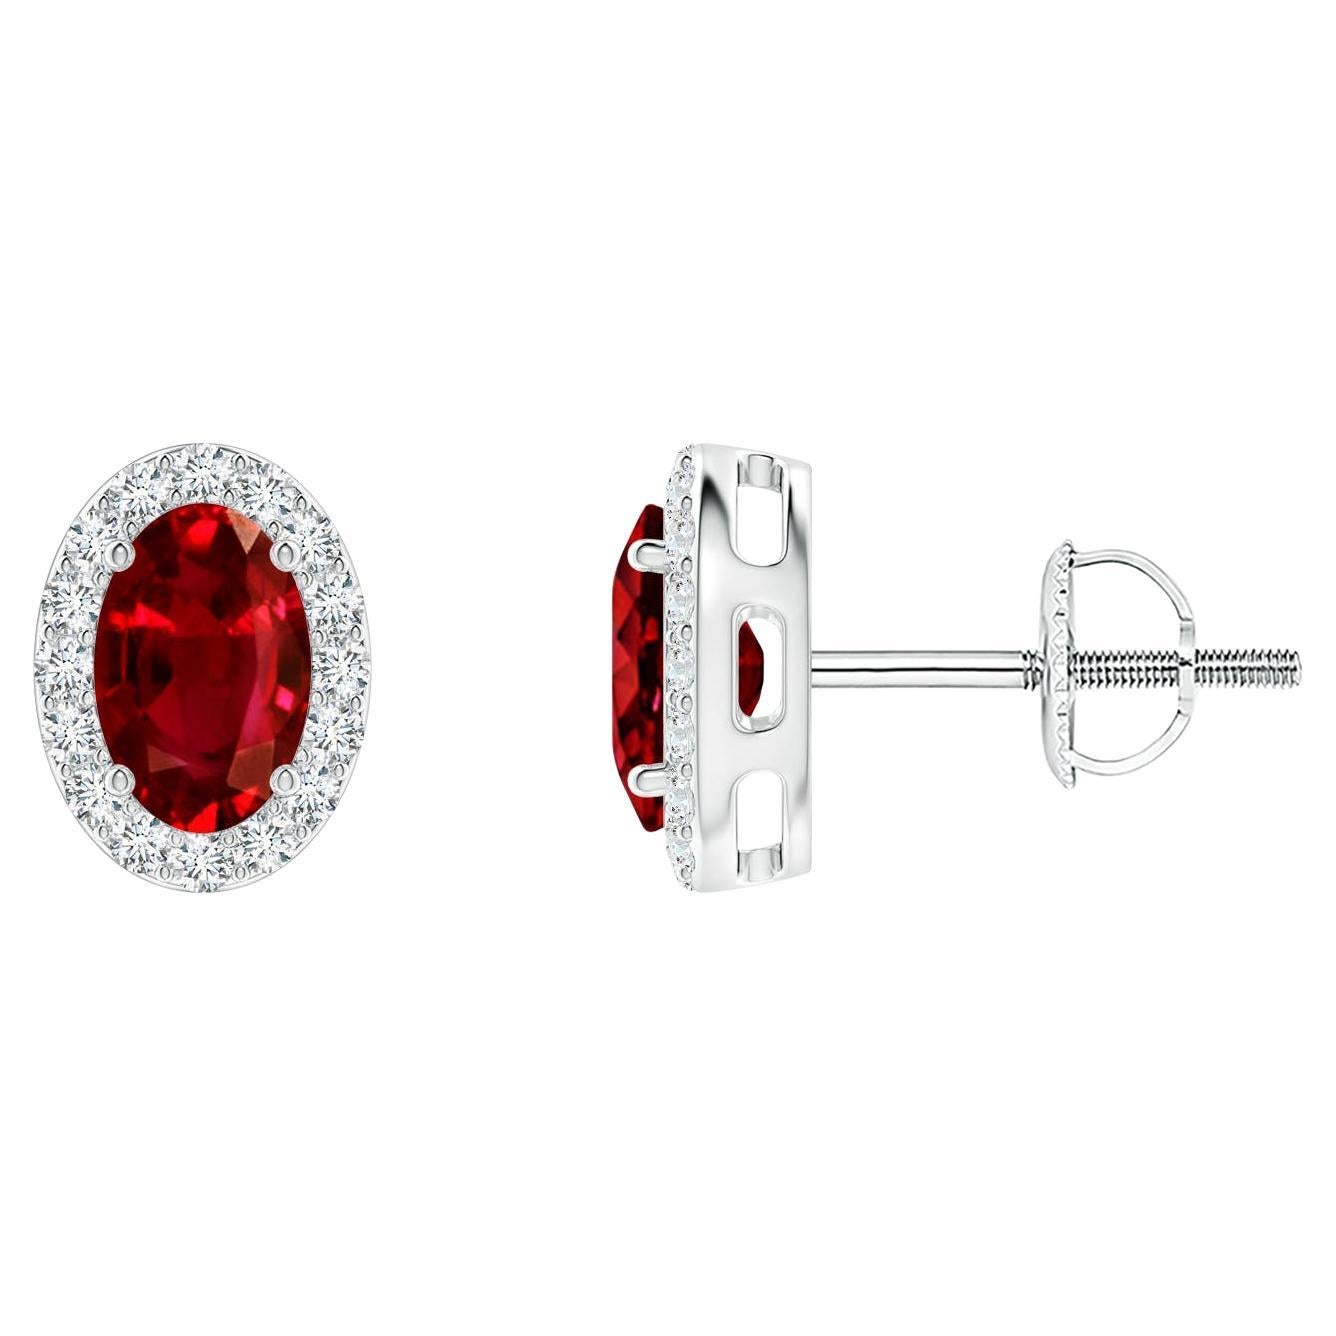 ANGARA Natural Oval 1.20ct Ruby Studs with Diamond Halo in 14K White Gold